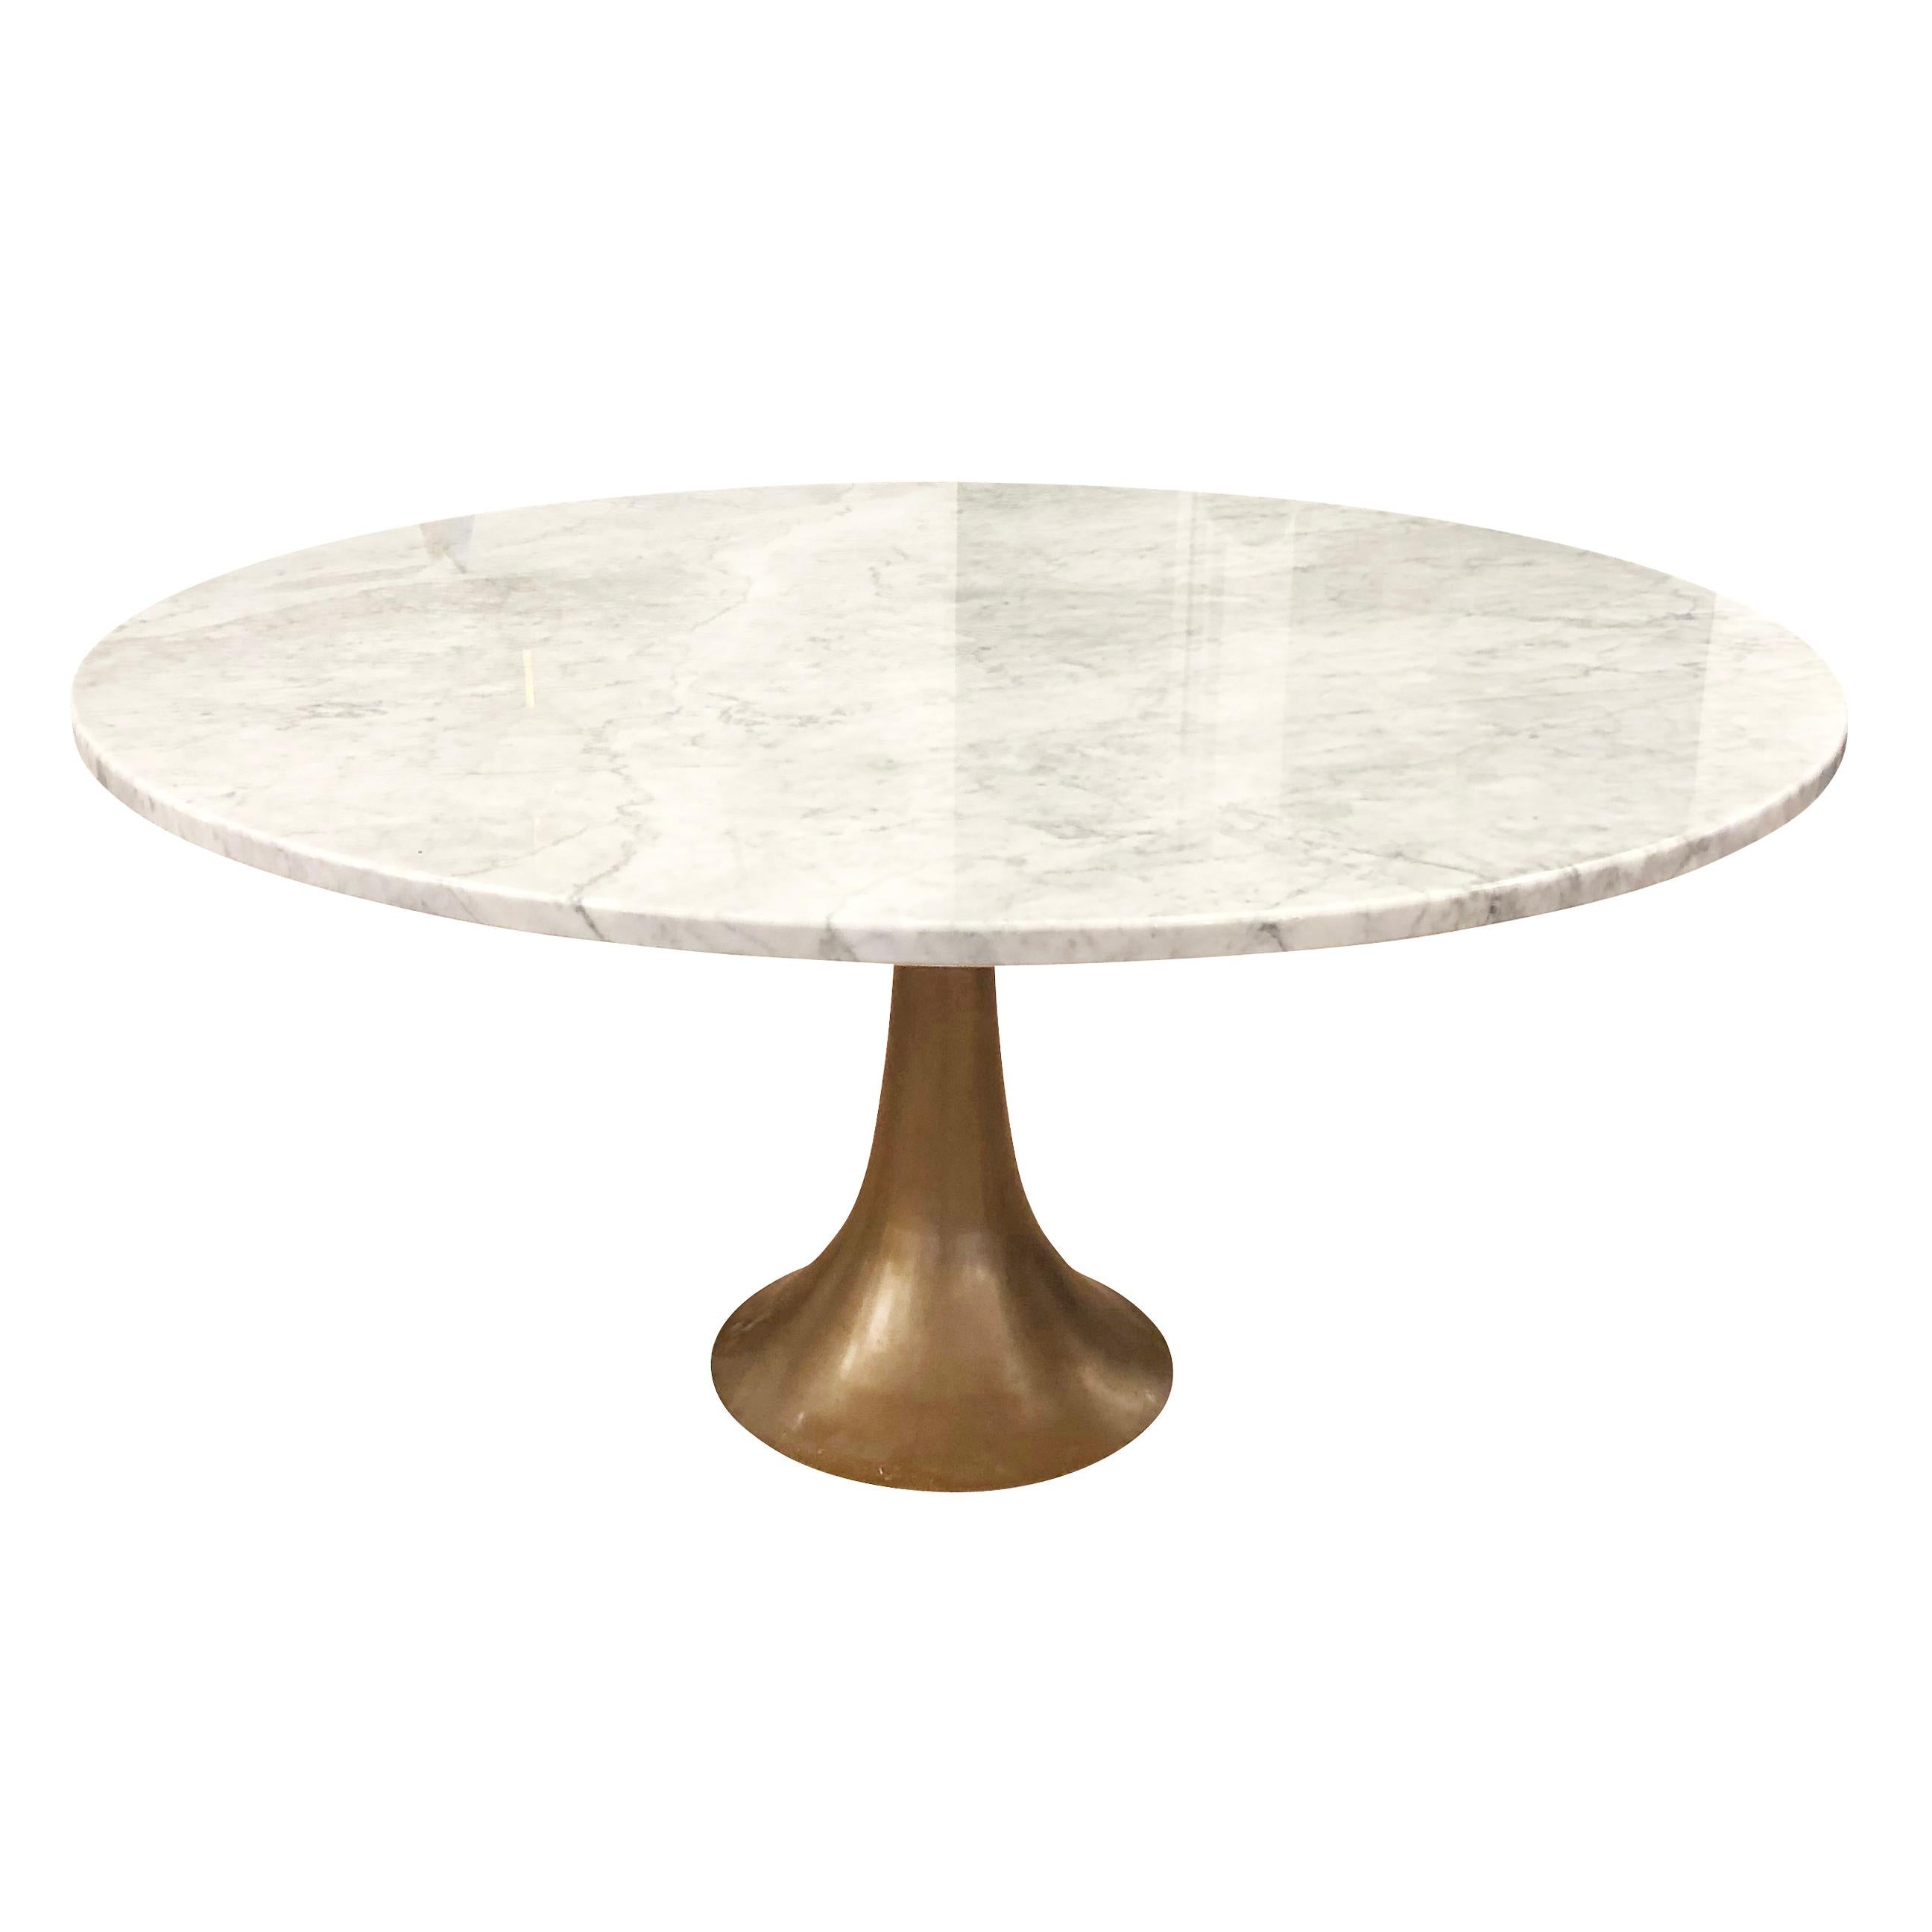 Magnificent dining or center table designed by Angelo Mangiarotti for Bernini in 1959. The top is white Carrara marble and the base is patinated bronze cast from a one of a kind terra-cotta mold.

Condition: Excellent vintage condition, minor wear